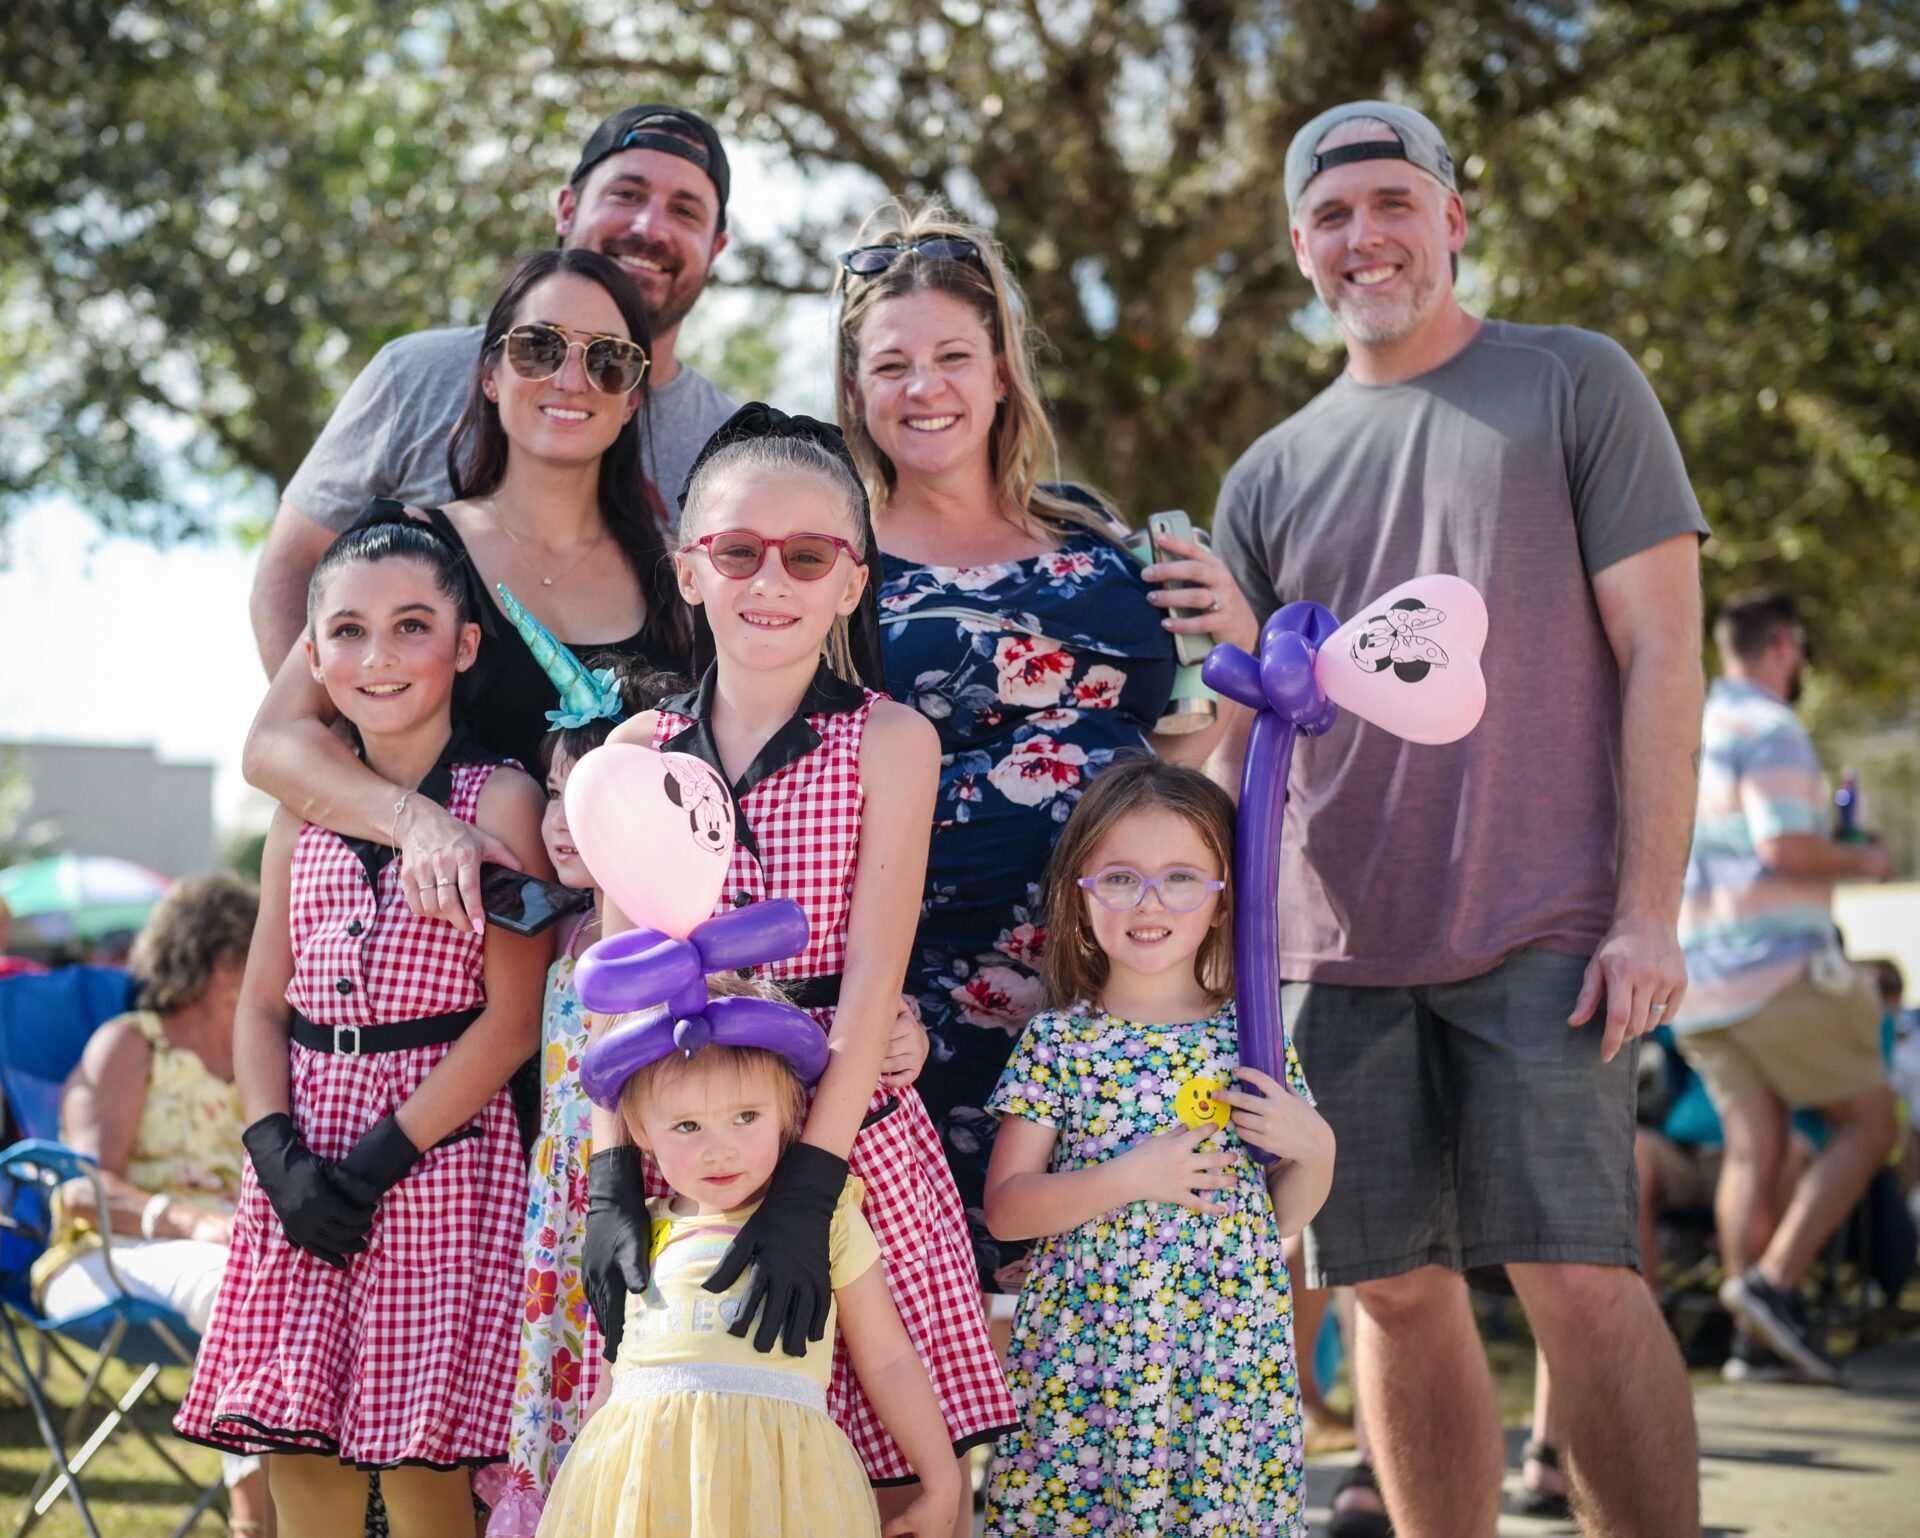 Family enjoys Town Center event in Ave Maria, FL